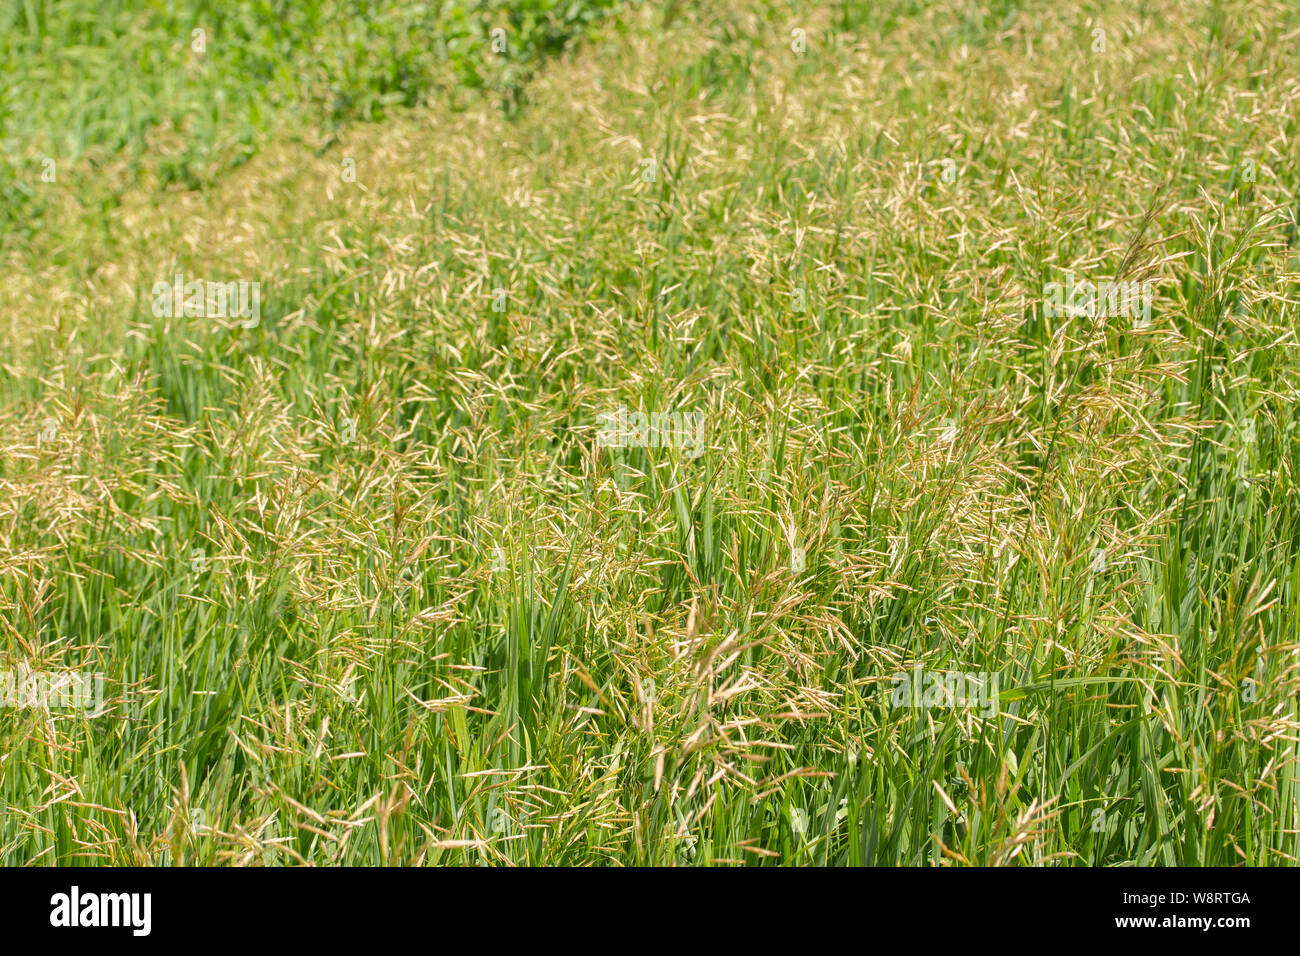 Wild grass with ripe panicles of seeds, background wallpaper banner. Bromopsis inermis Poaceae Family Stock Photo